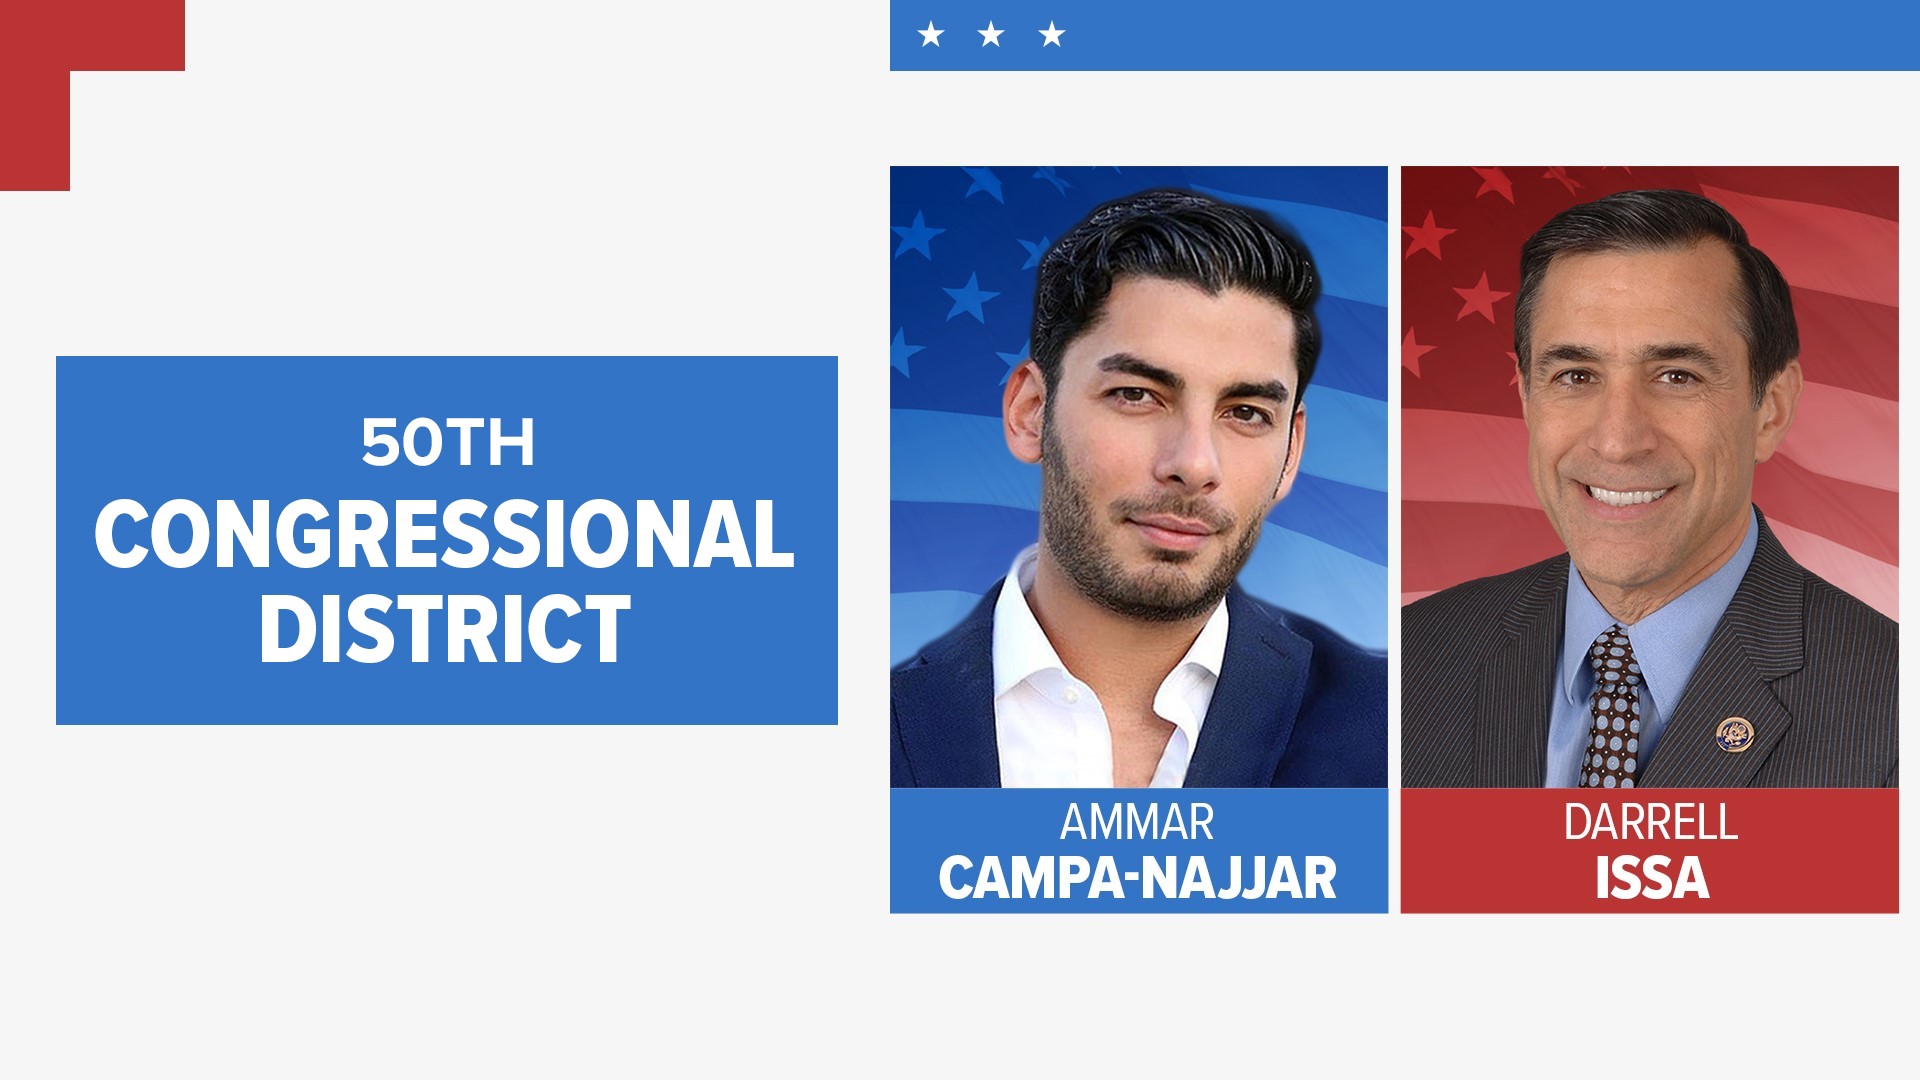 Candidates Campa-Najjar and Issa continue to campaign against each other as they battle to win the empty seat vacated by Duncan Hunter.